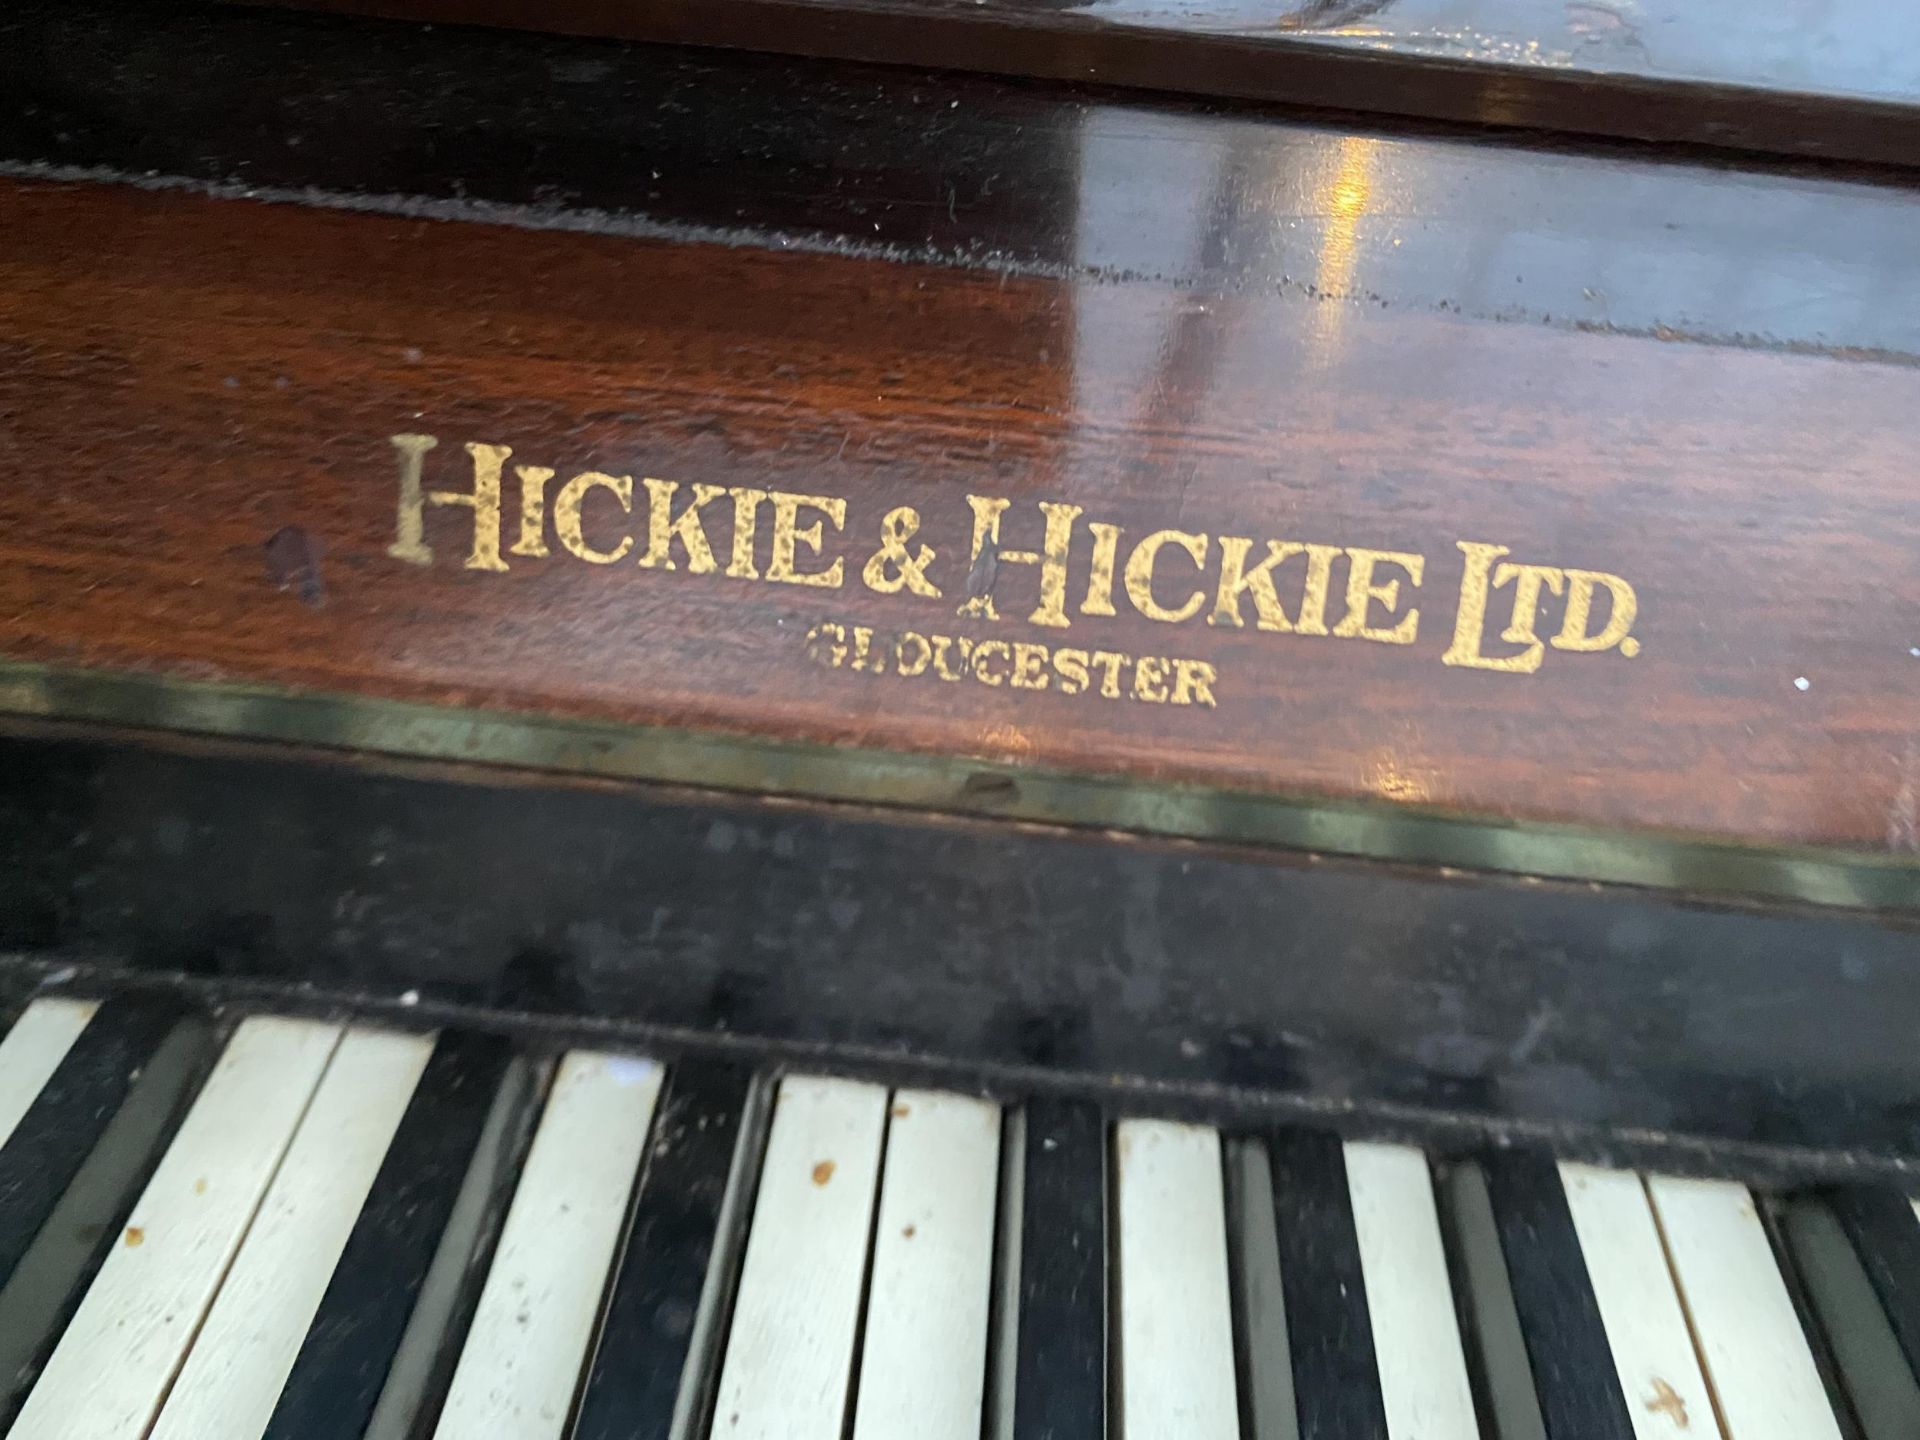 A HICKIE & HICKIE OVERSTRUNG PIANO - Image 3 of 3